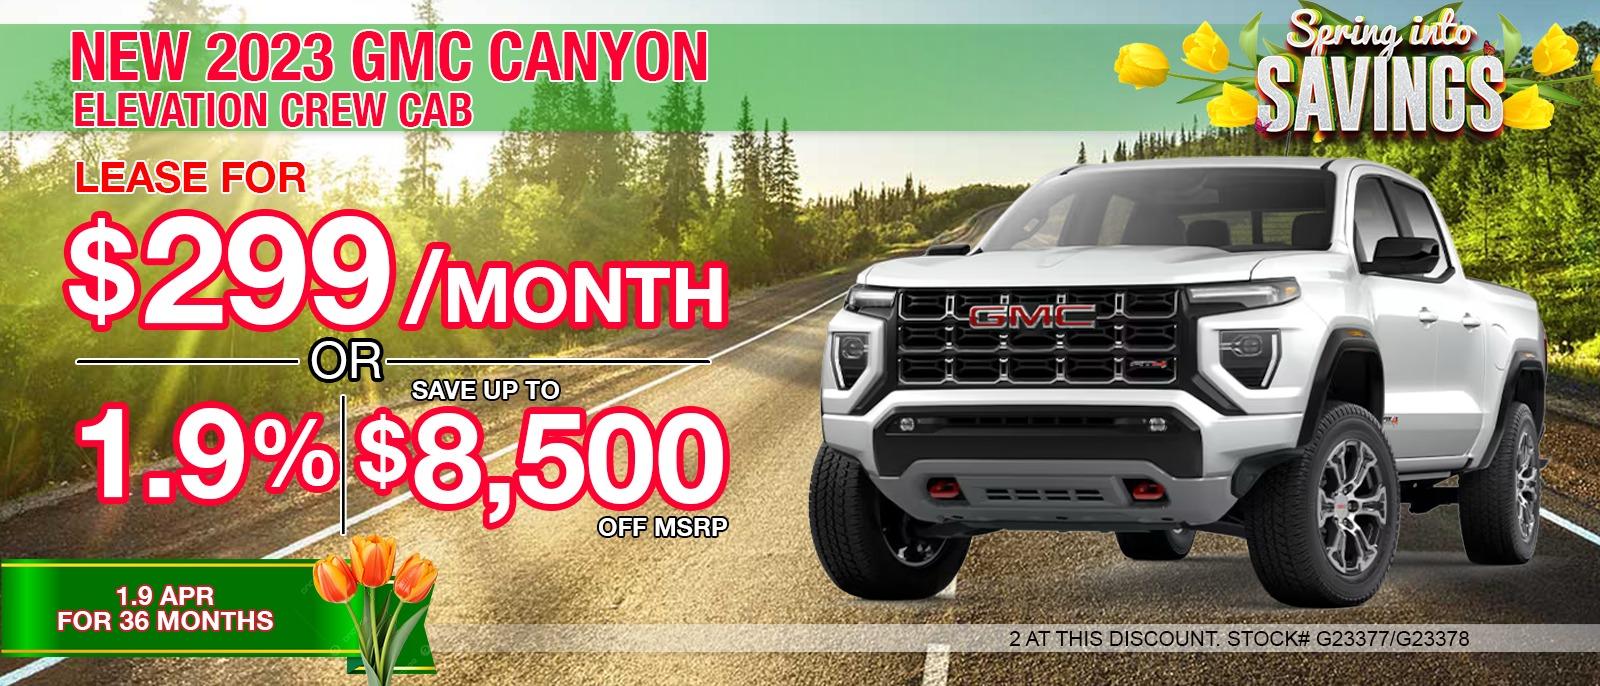 2023 GMC CANYON ATX. Your Net Savings After All Offers $7,000 OFF MSRP.